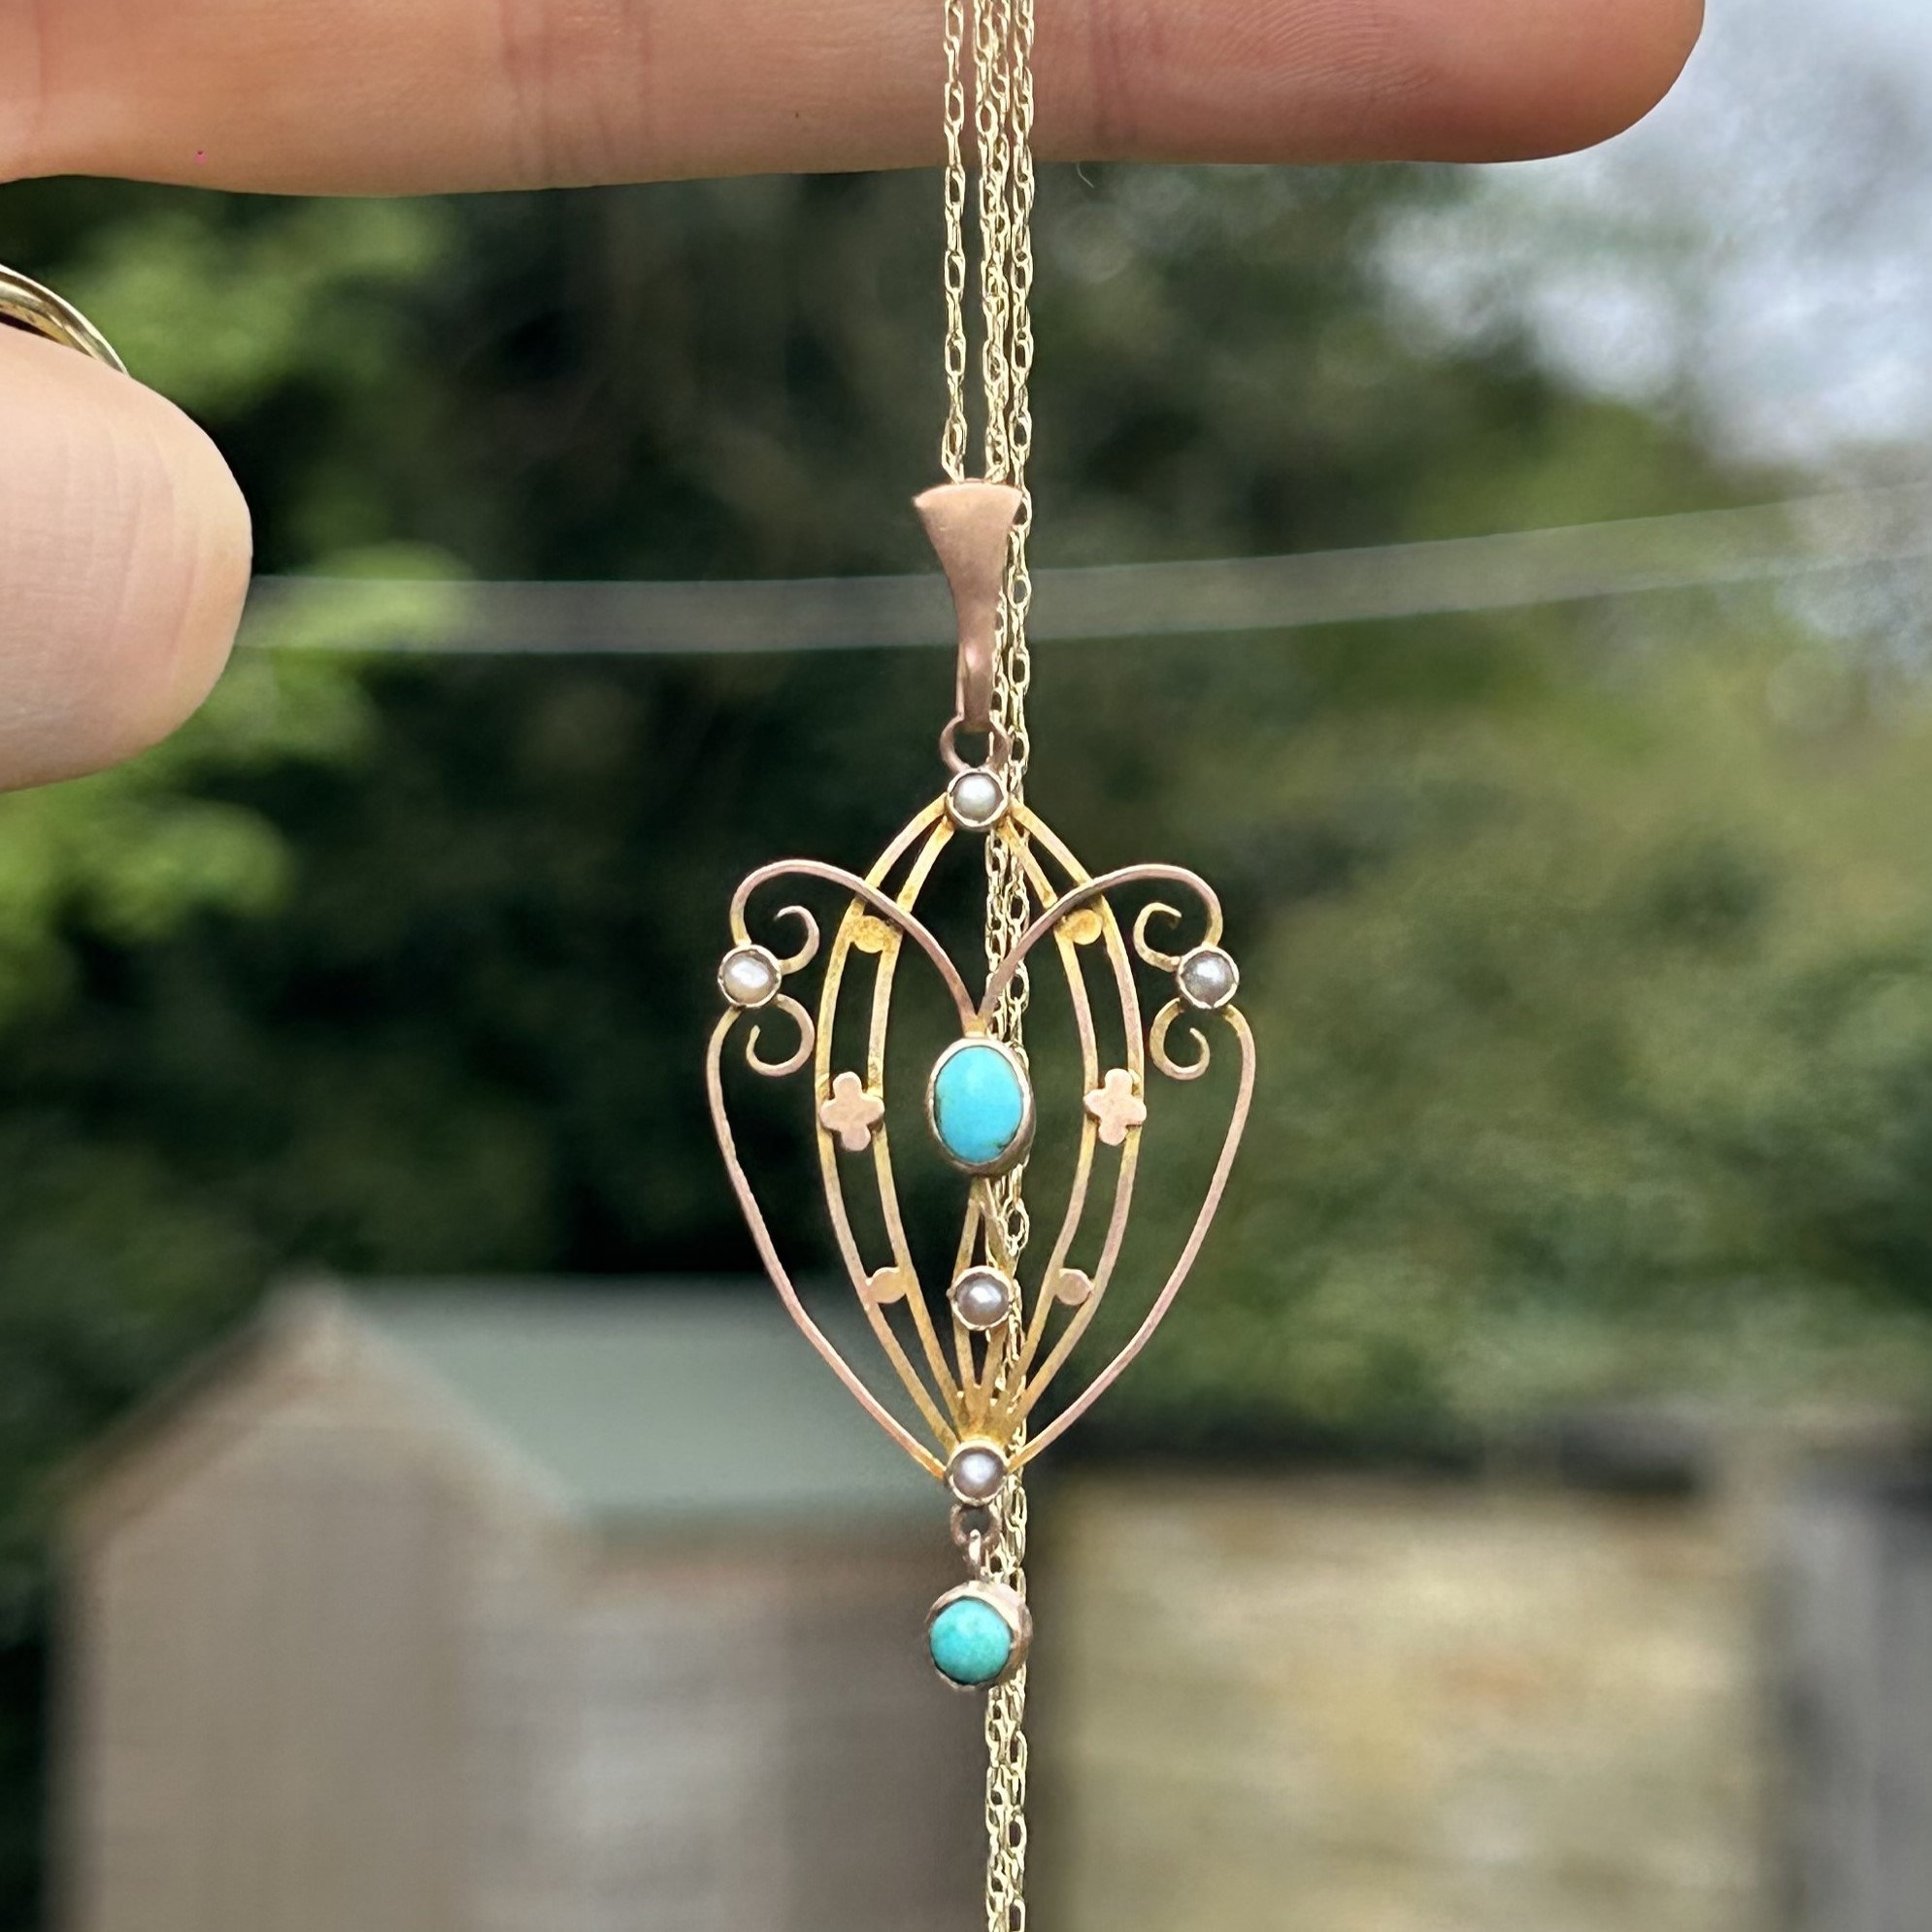 9ct gold turquoise and seed pearl lavaliere style pendant on chain 2.5 g - Bild 5 aus 5